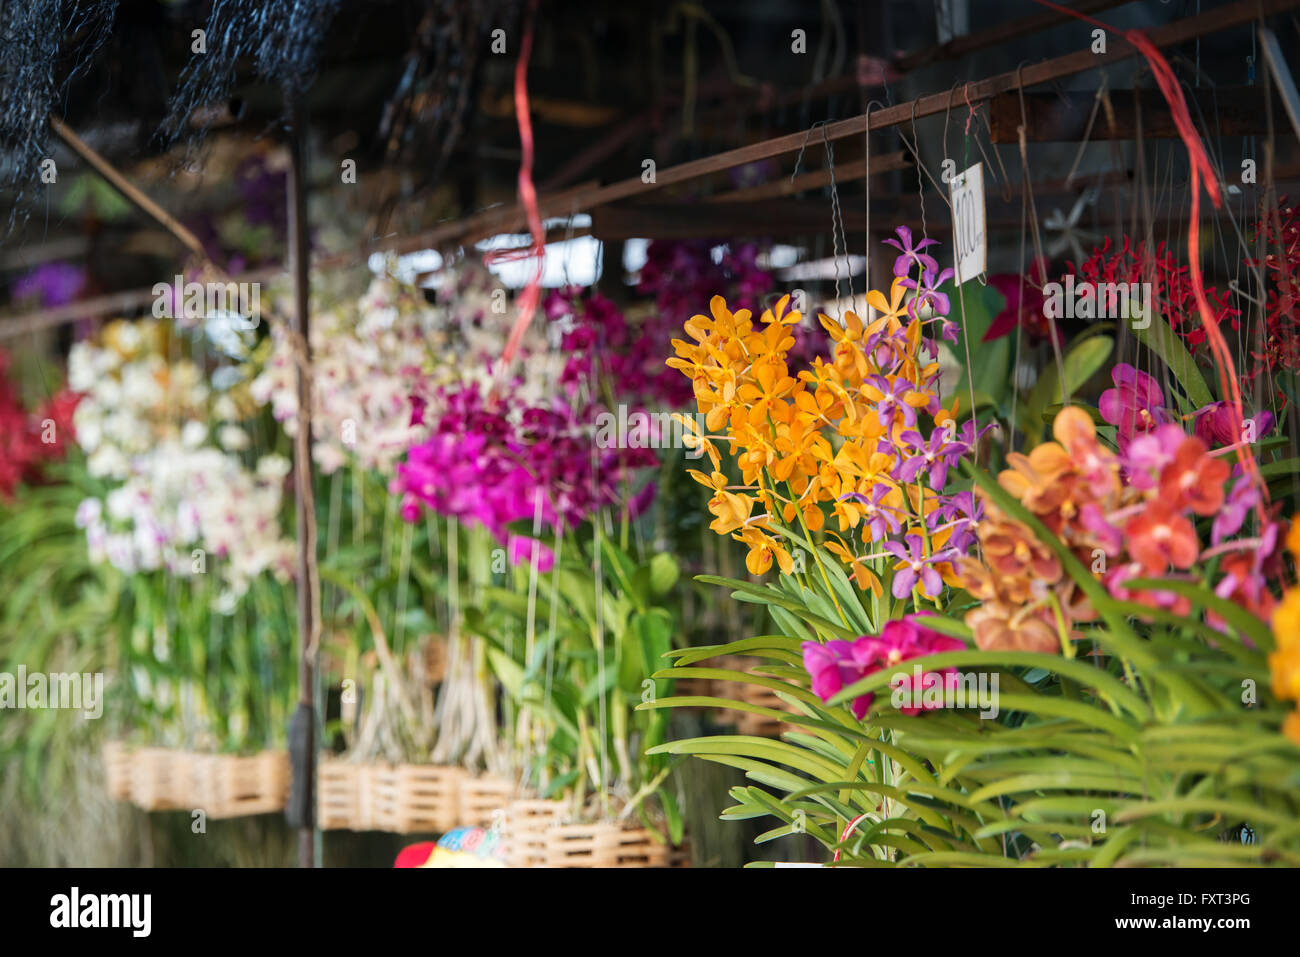 orchid flower store in Thailand Stock Photo